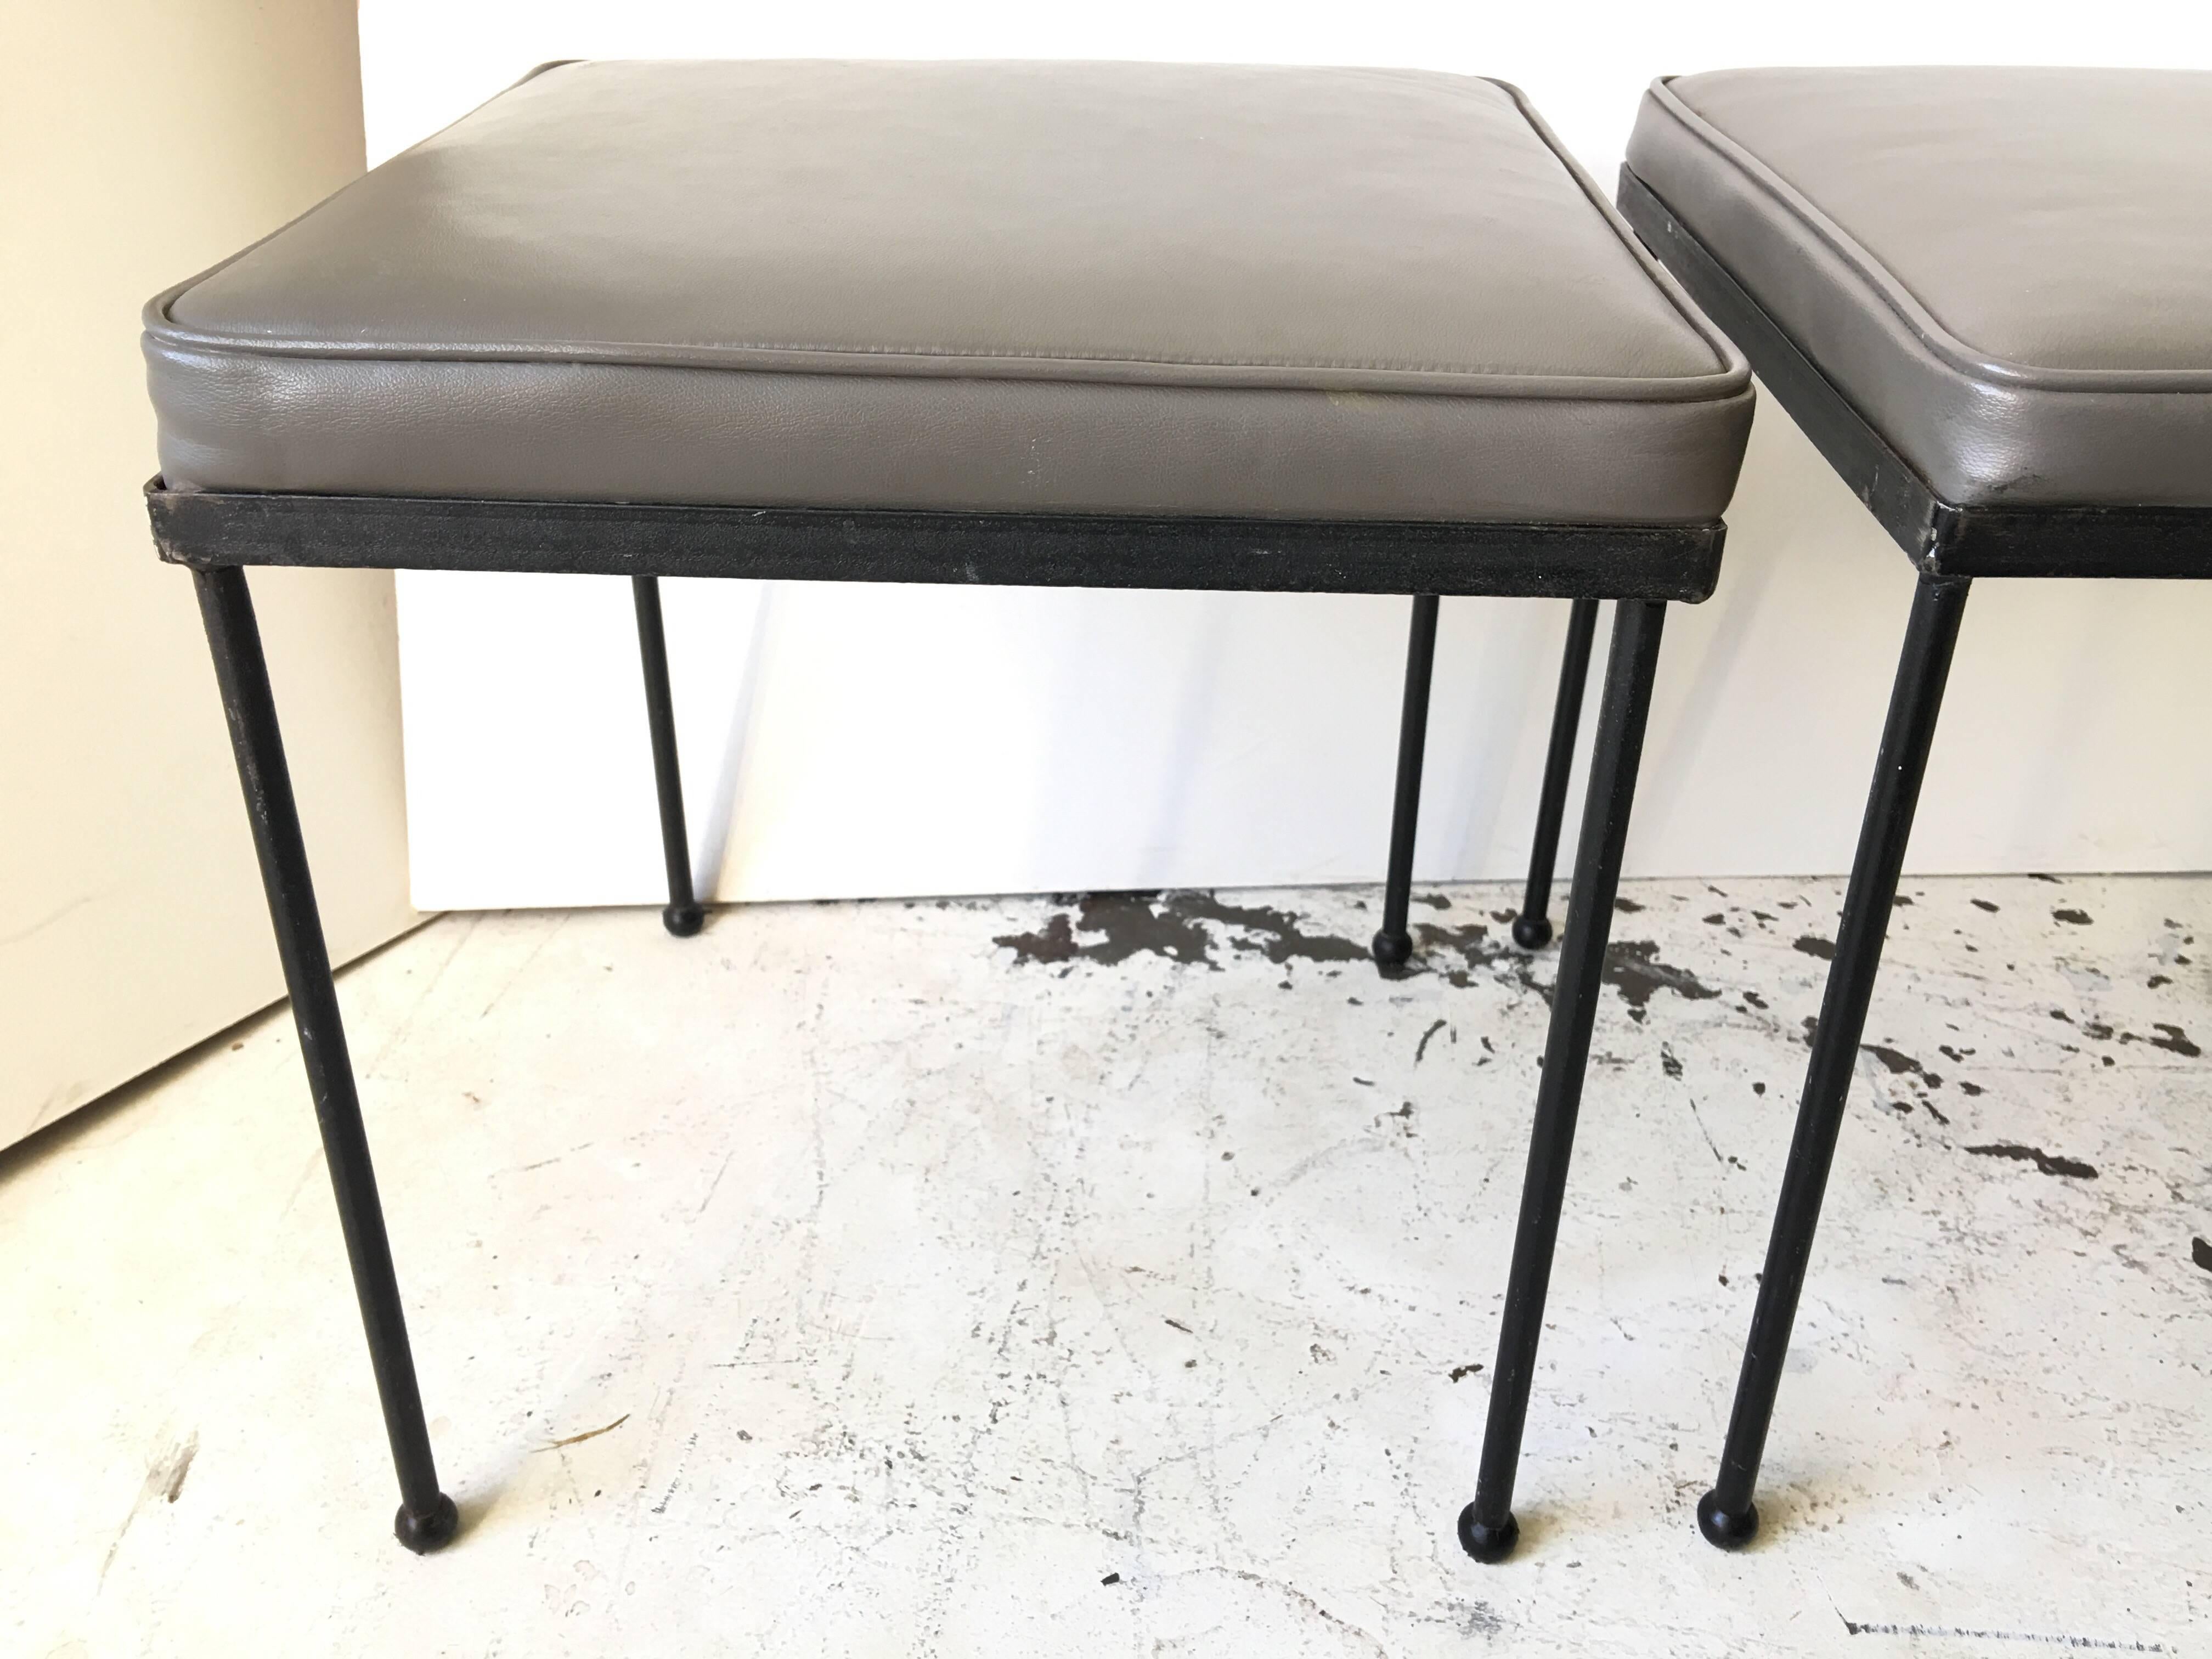 From a famed Mid-Century Modern artist, designer. Set of three iron and original vinyl stools, from the 1950s. All ball feet intact and upholstery free from tears.